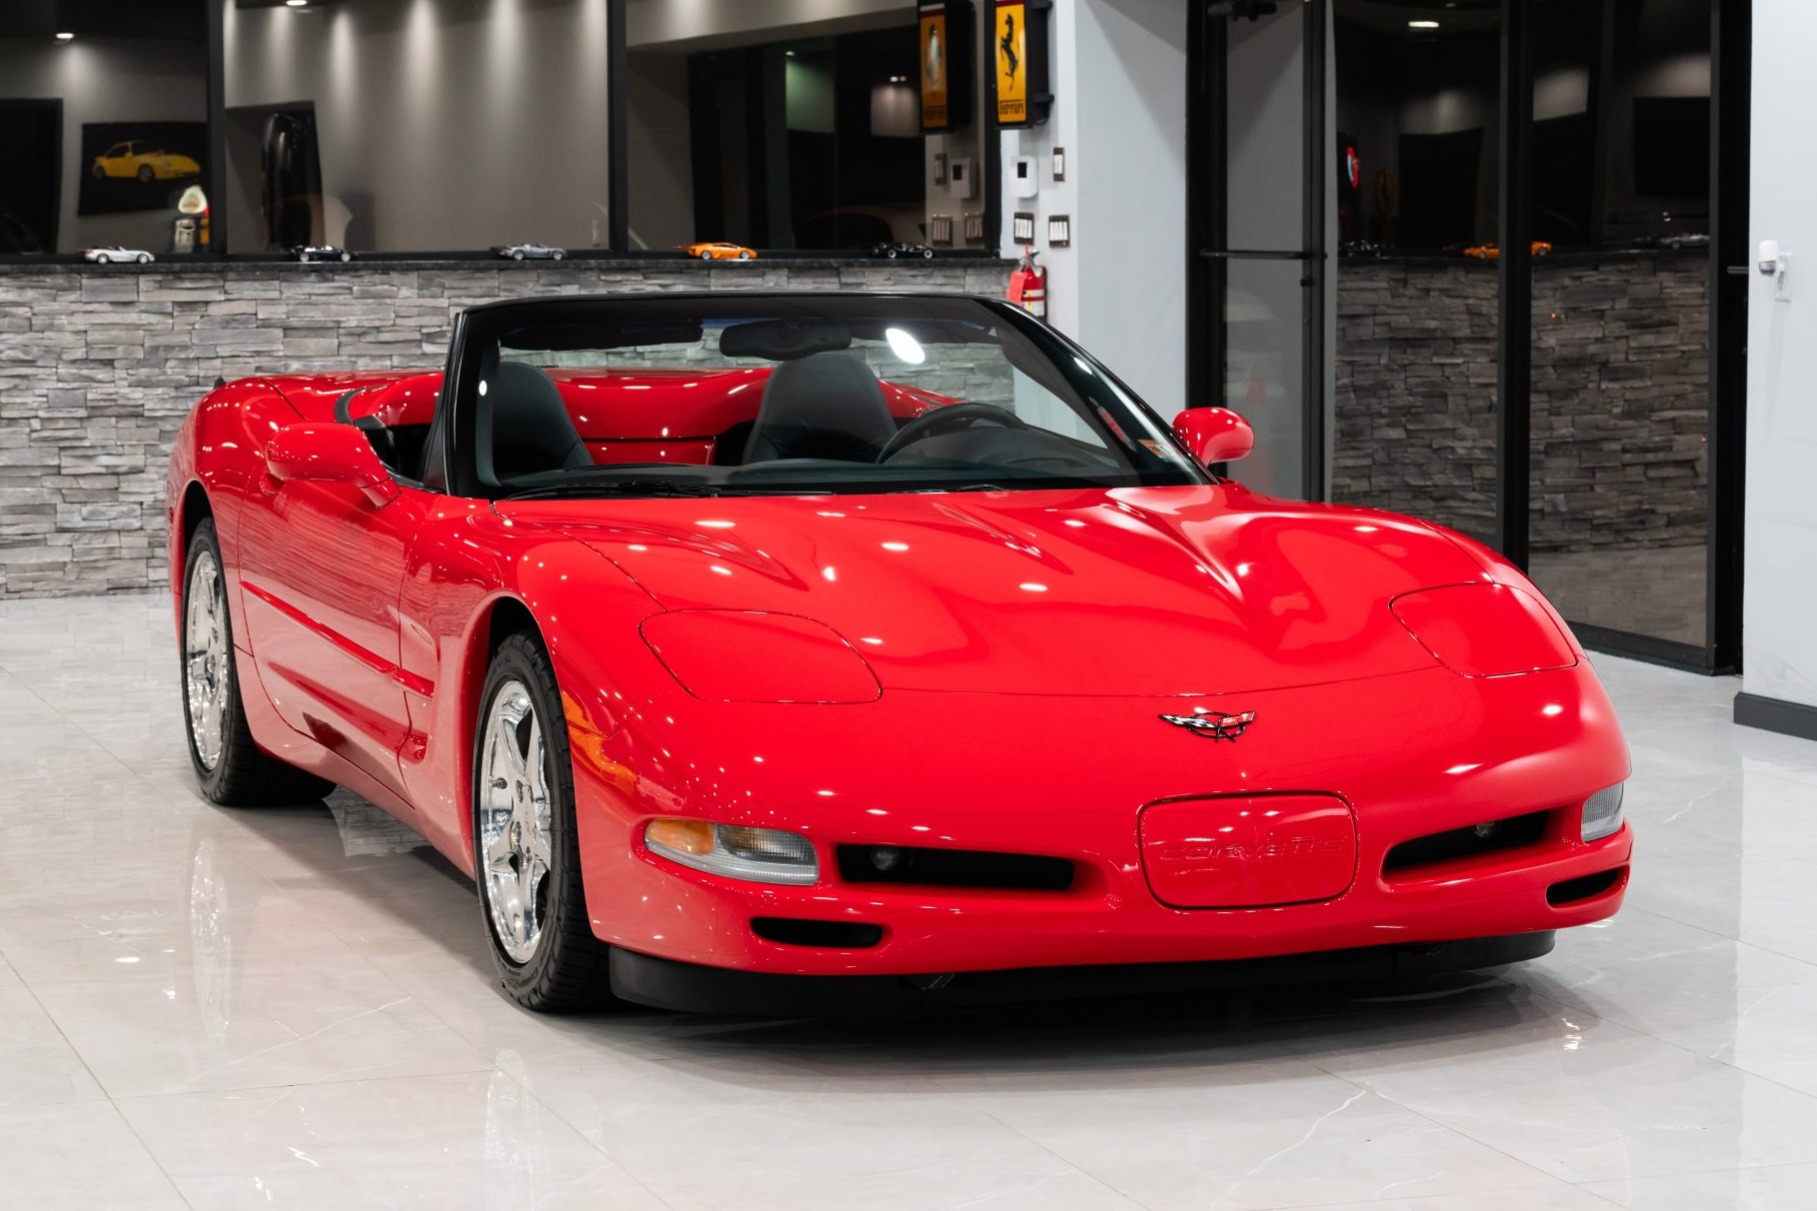 Used 13k-Mile 2004 Chevrolet Corvette Convertible 6-Speed Review